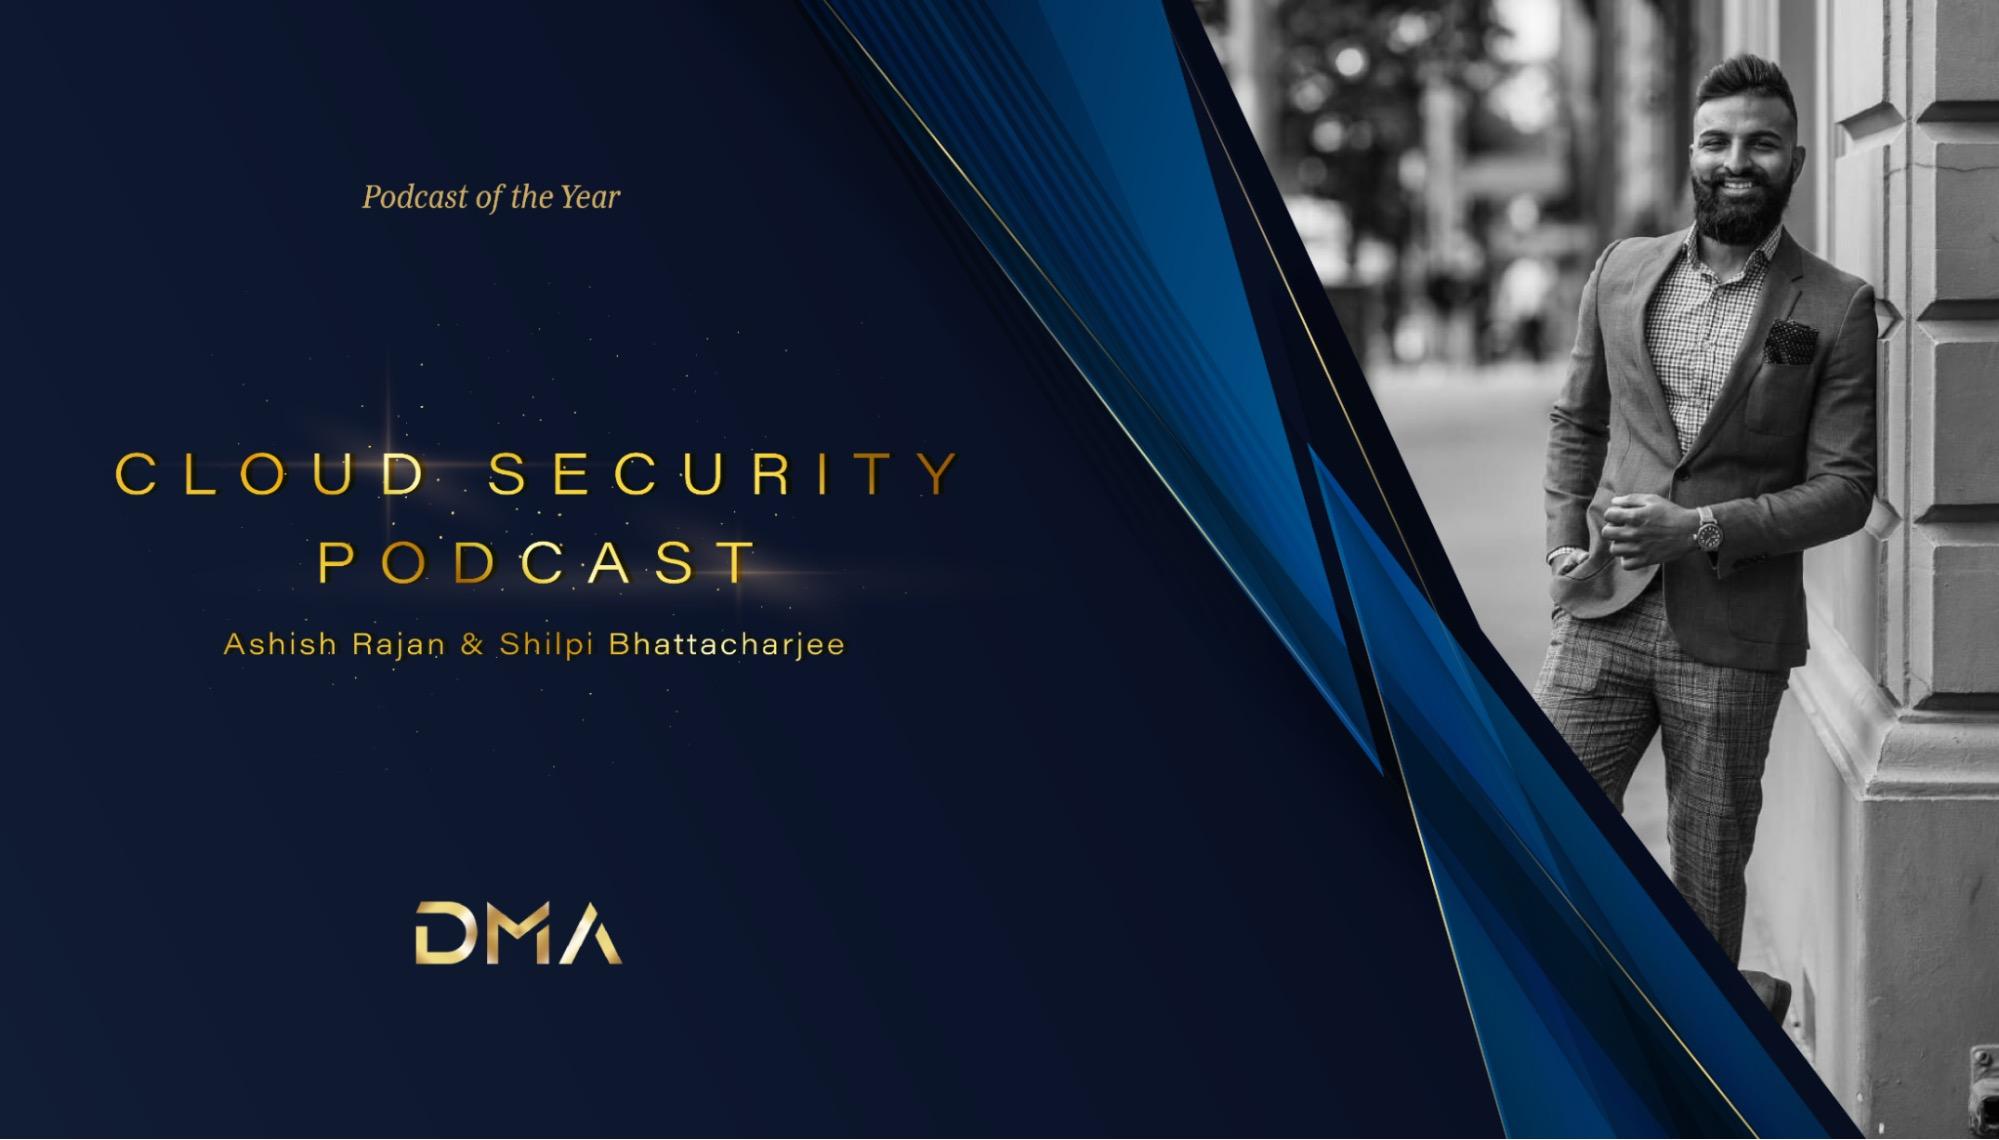 wordpress-sync/feature-cloud-security-podcast-award